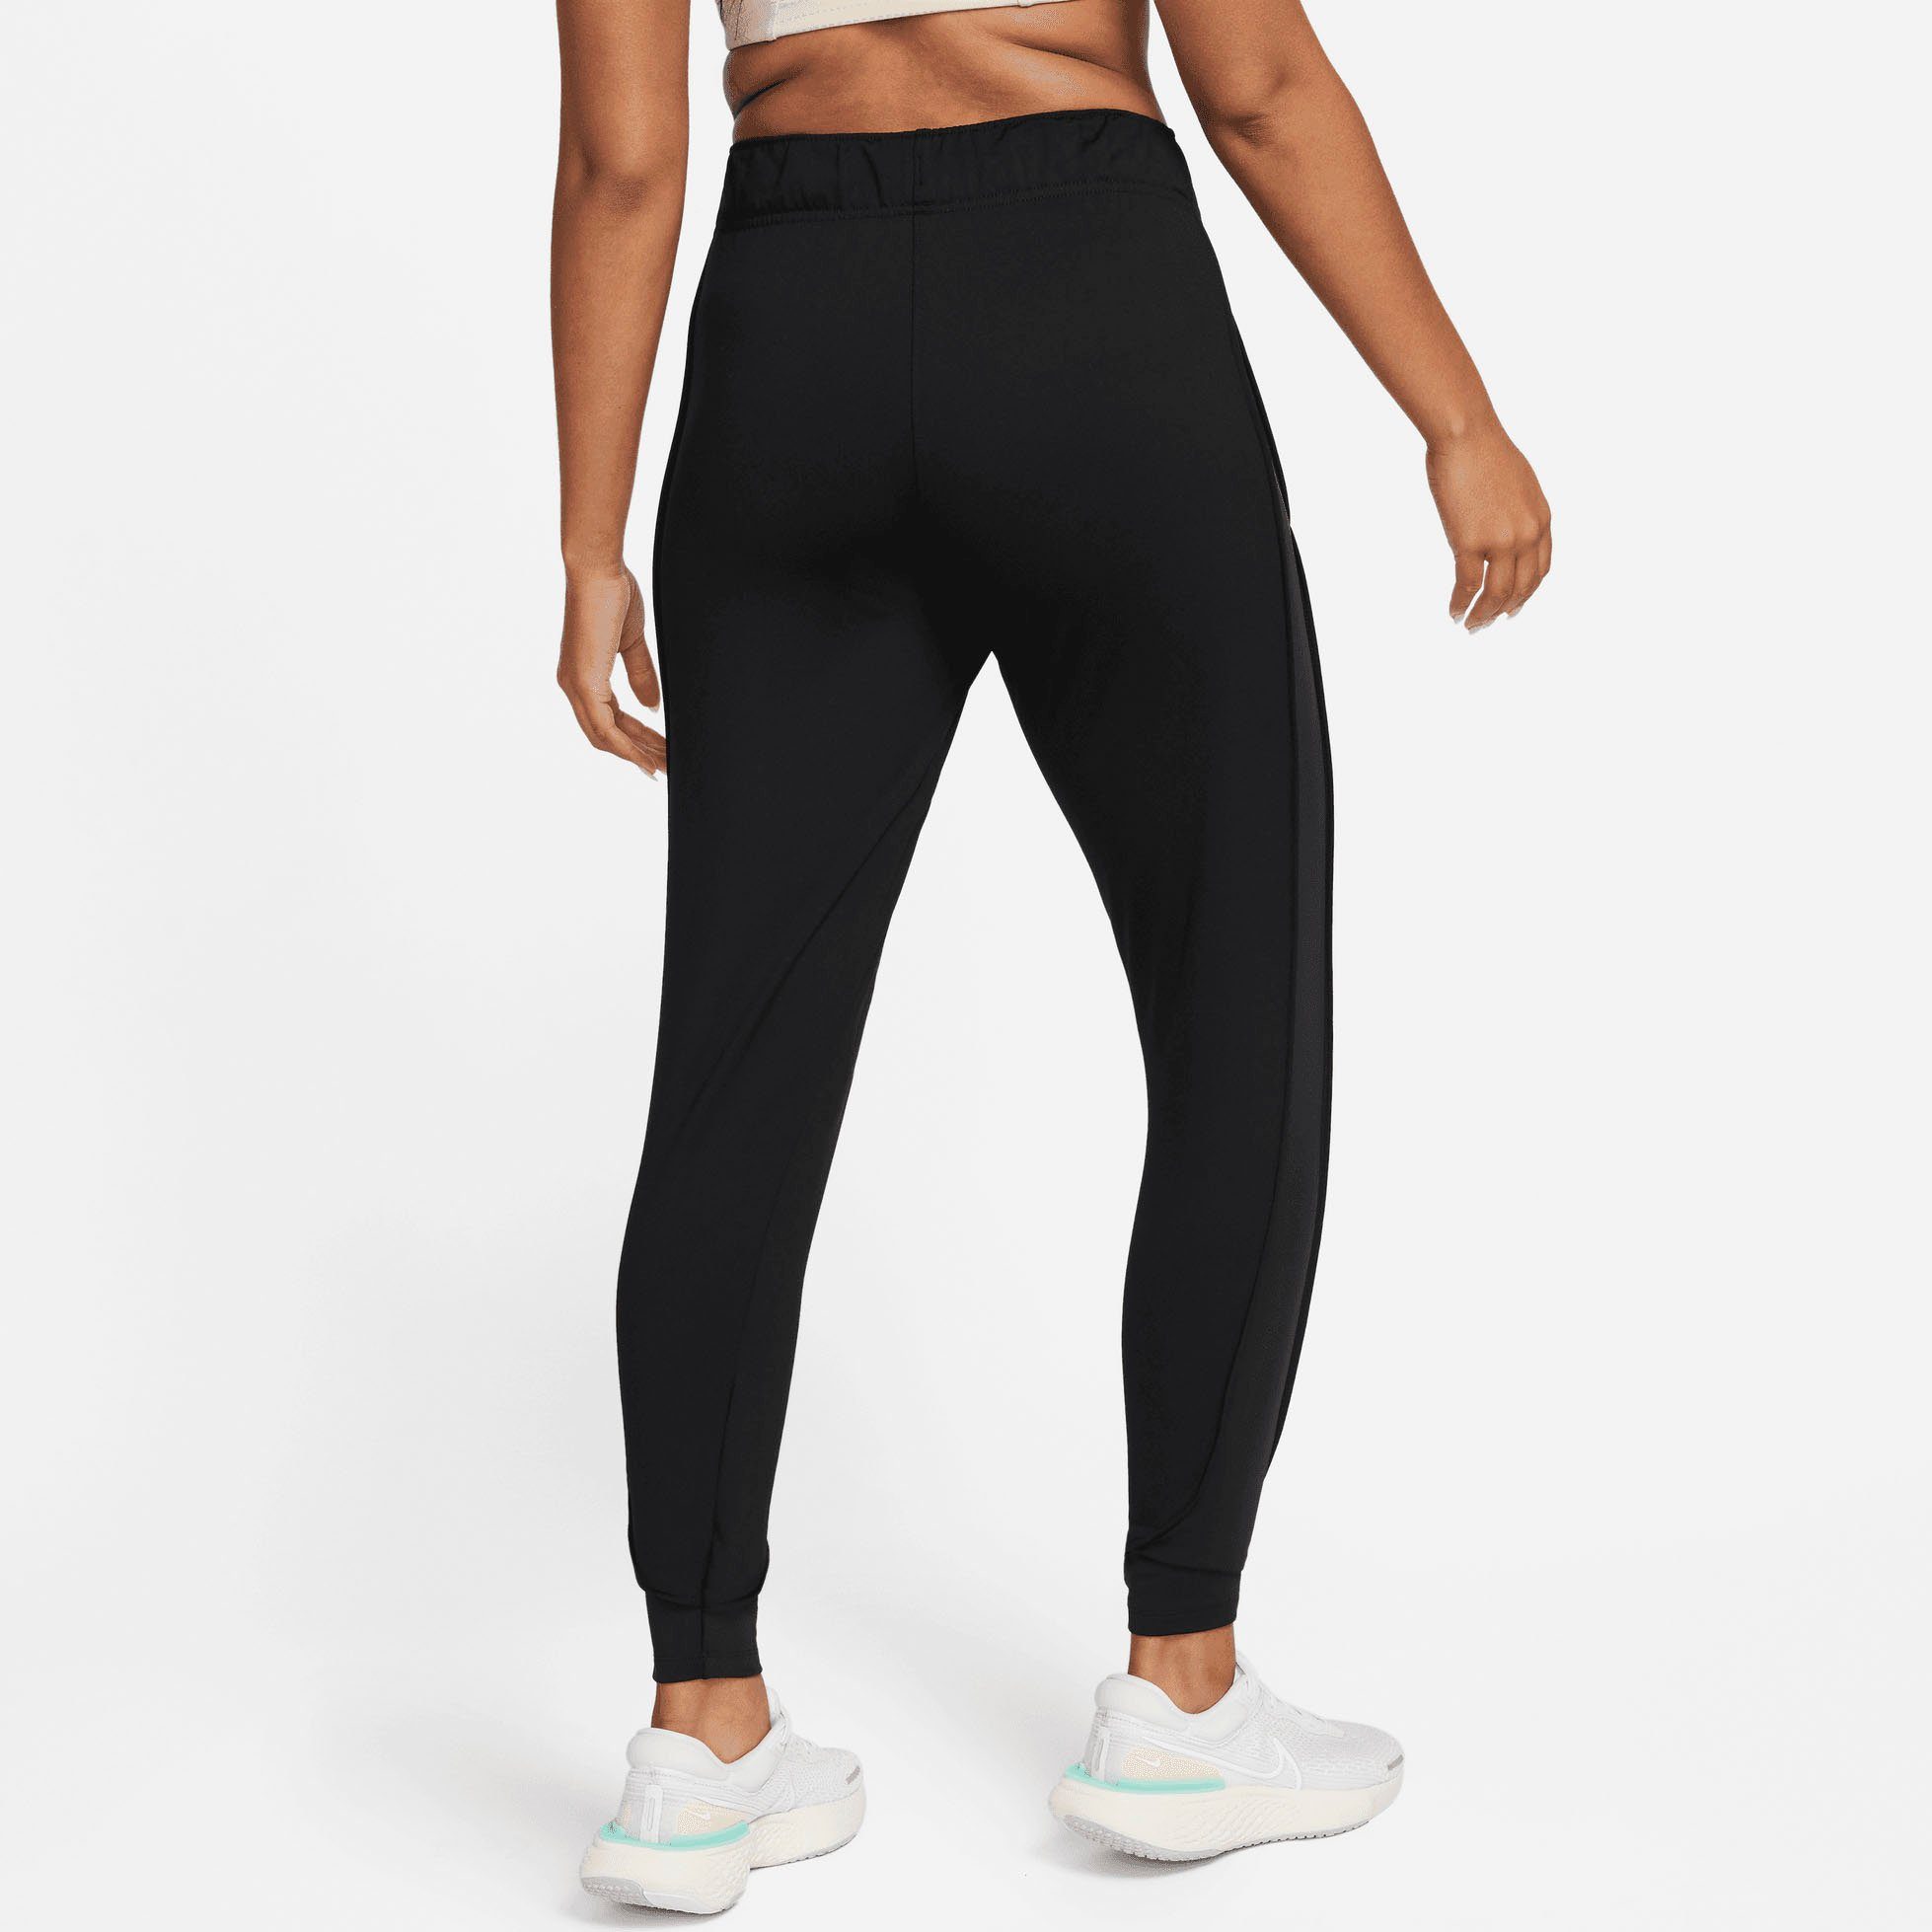 Essential Nike Laufhose Running Pants Therma-FIT Women's